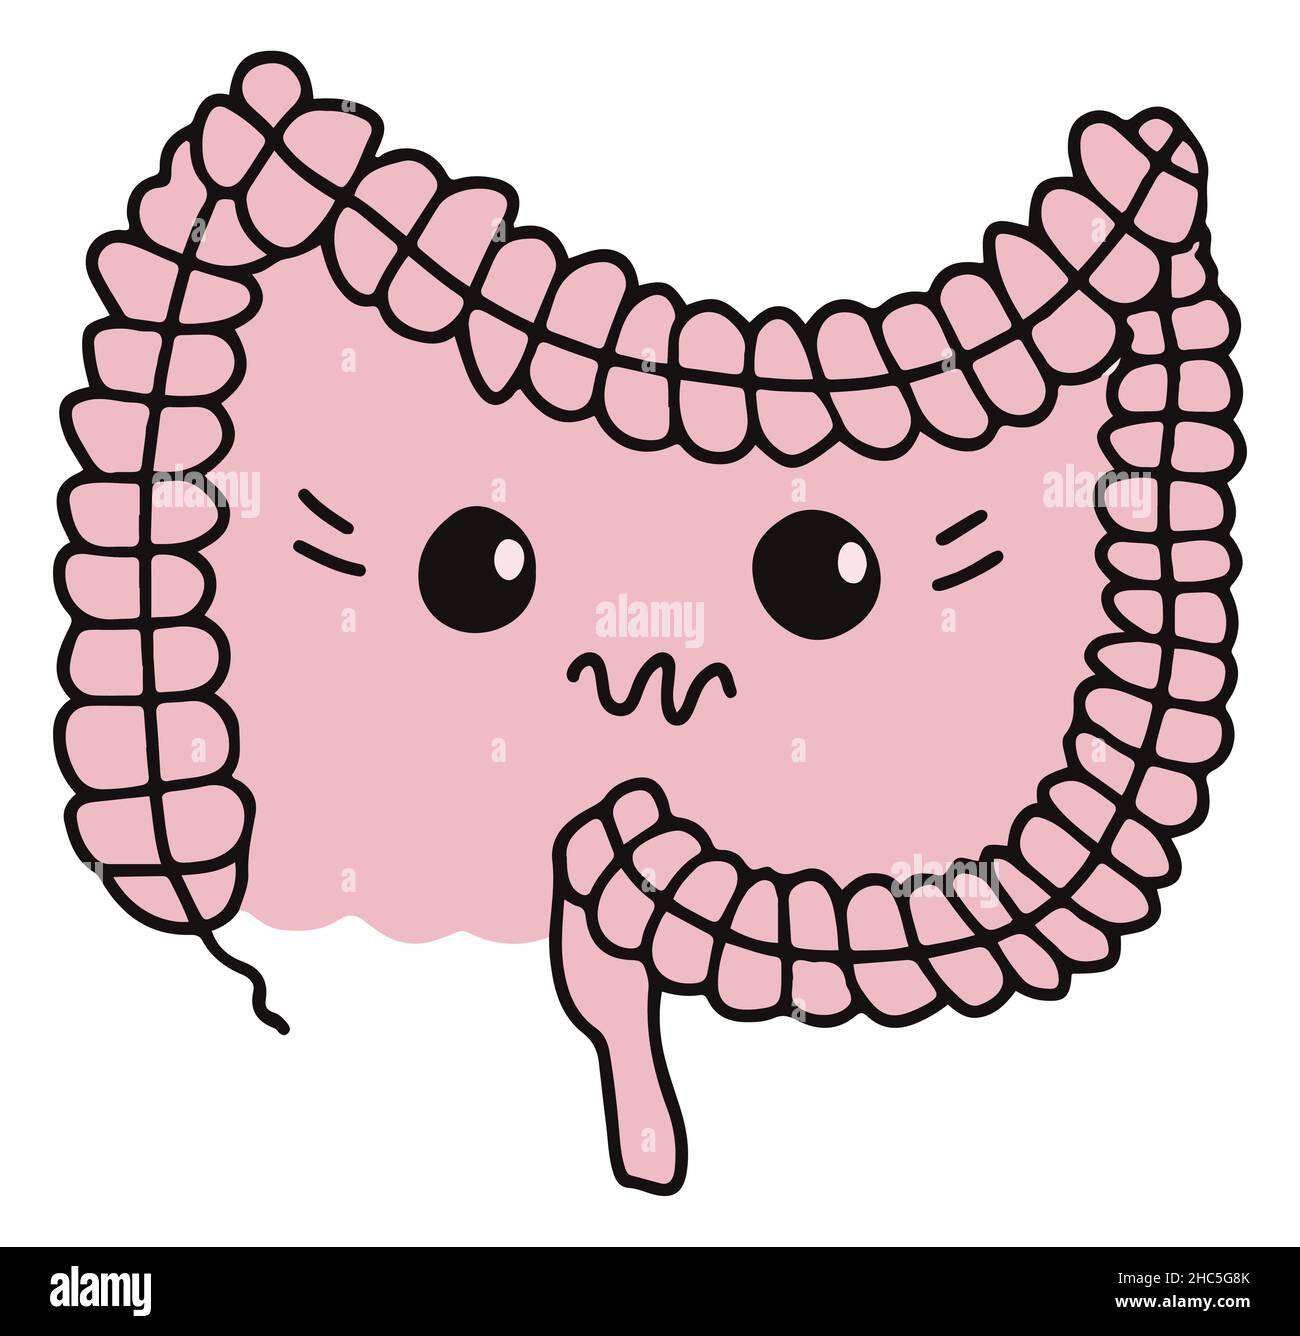 Simple gastrointestinal illustration of bowel internal system. Healthy gut concept. Unhappy abdominal cute expression Stock Vector